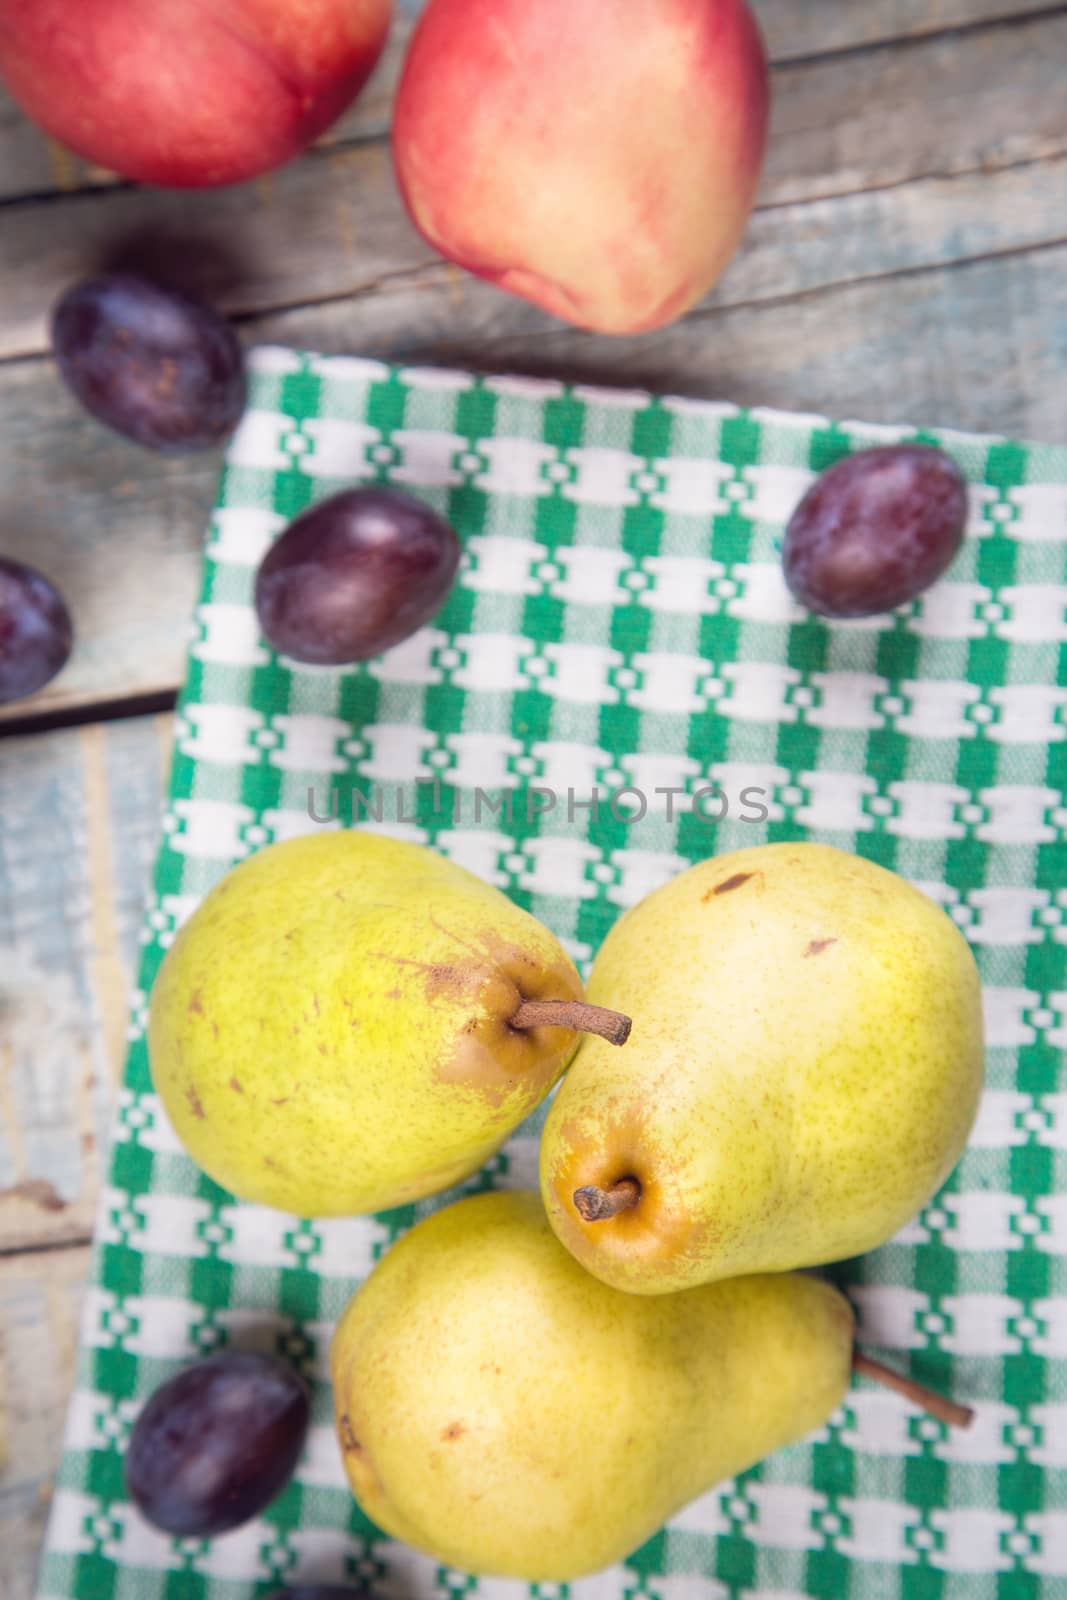 pears by pil76